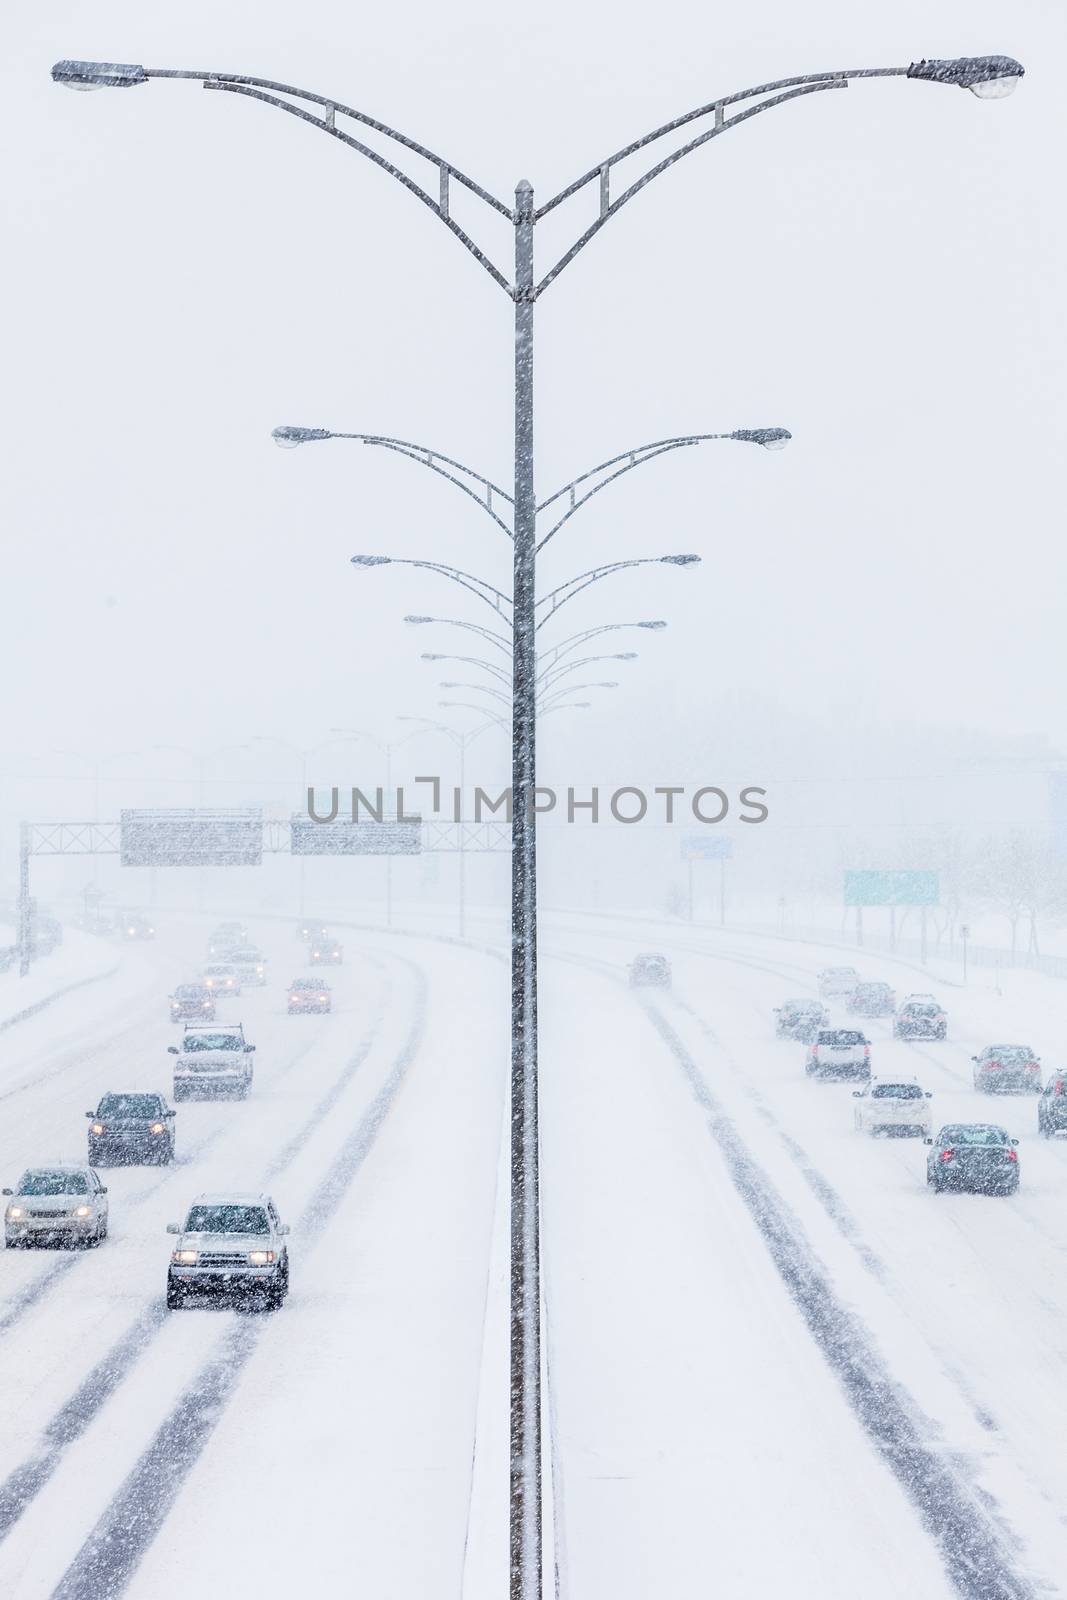 Symmetrical Photo of the Highway Center during a Snowstorm